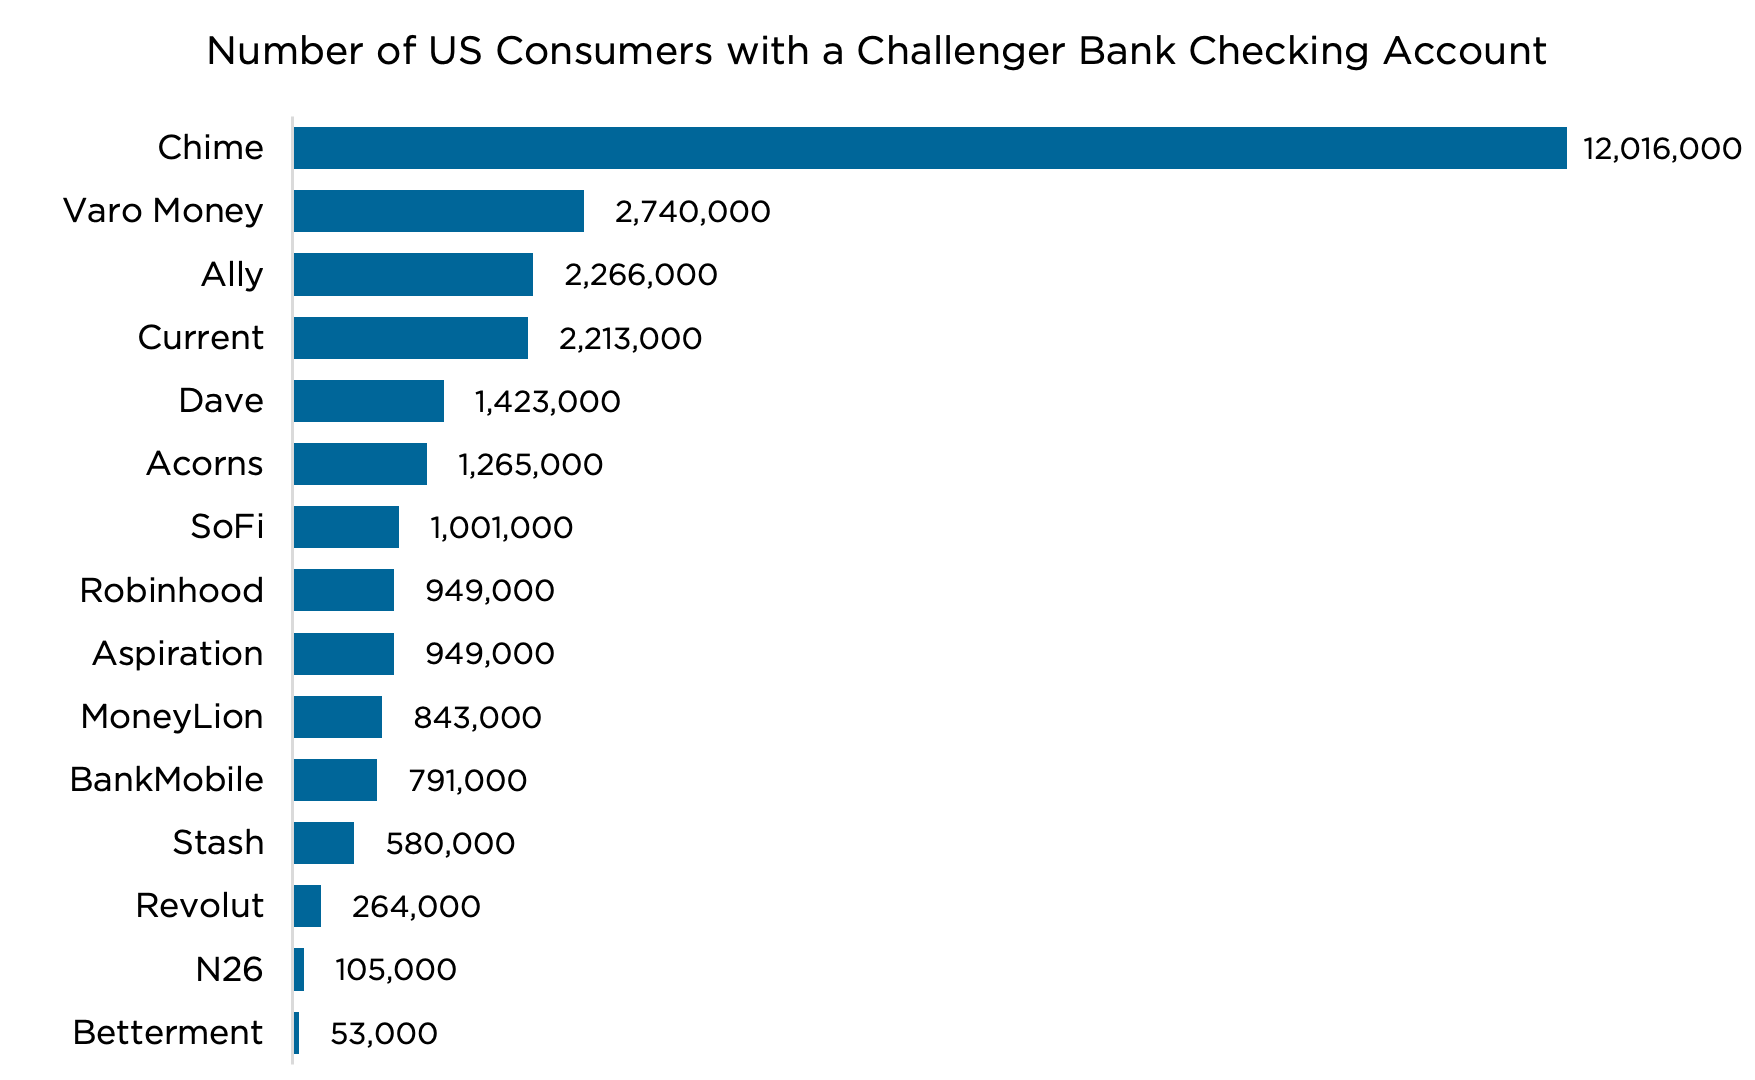 Number of challenger bank customers, Source: Cornerstone Advisors and StrategyCorps, via Ron Shevlin, Forbes